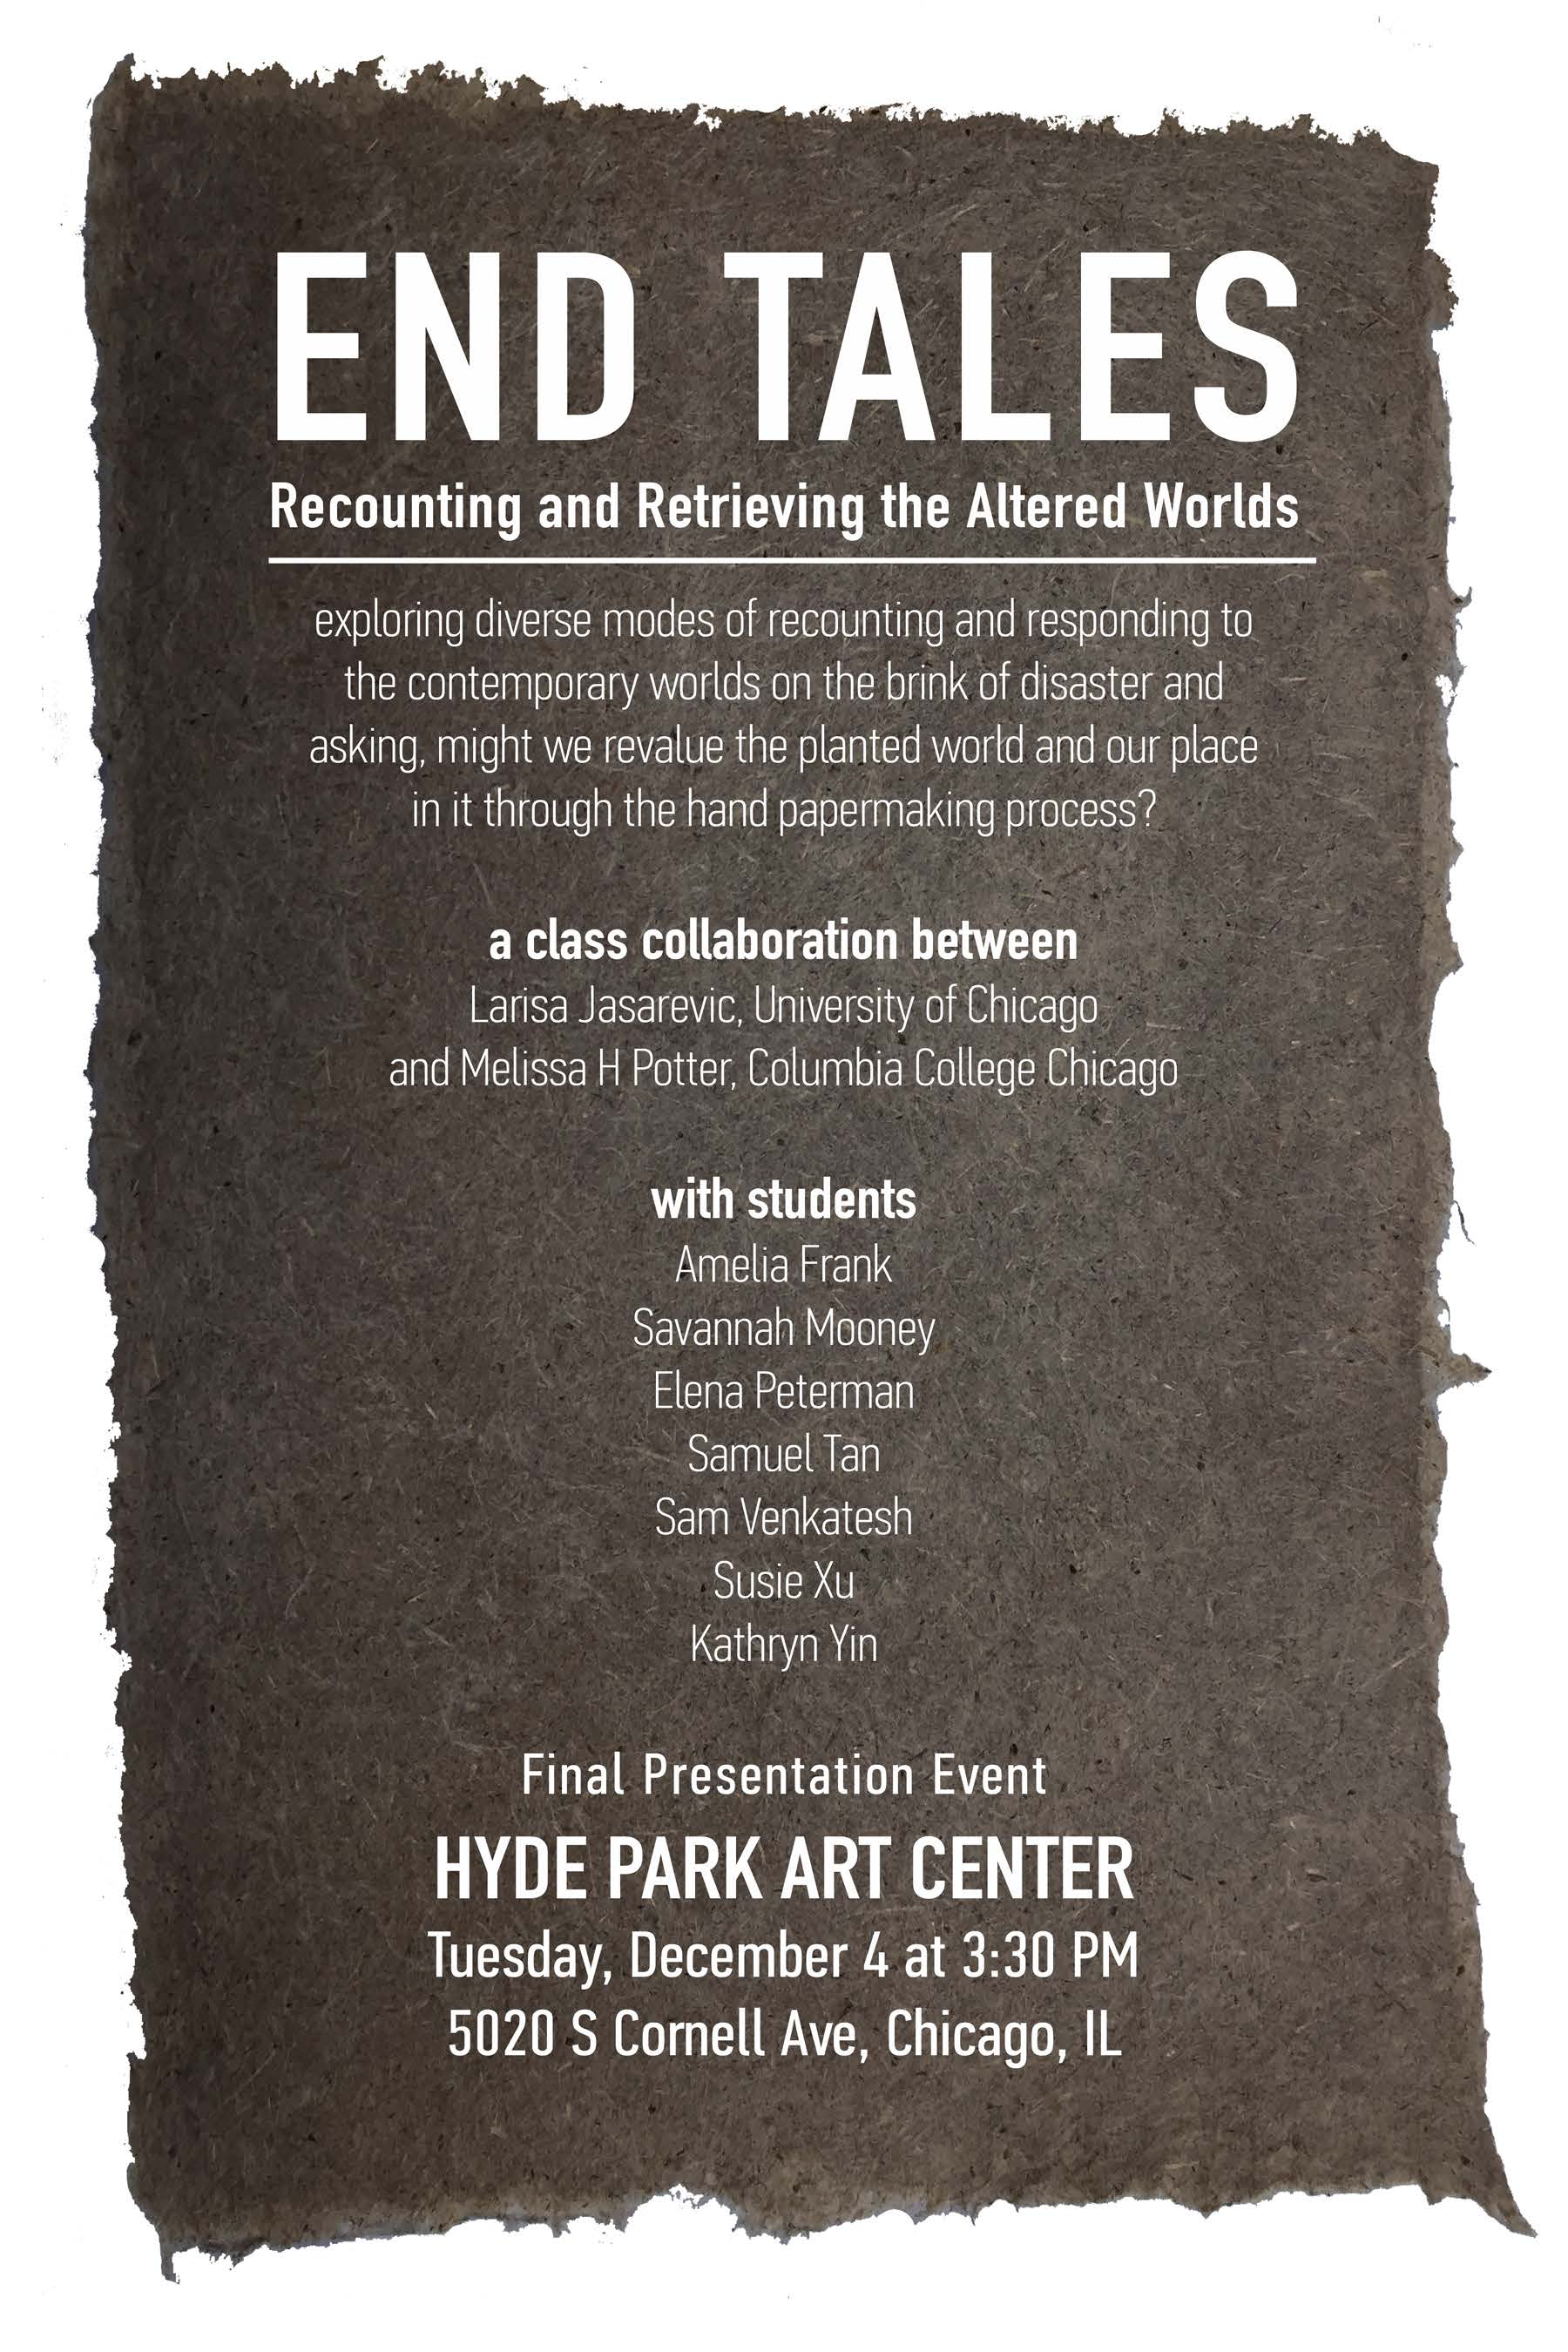   End Tales: Recounting and Retrieving the Altered Worlds event poster  